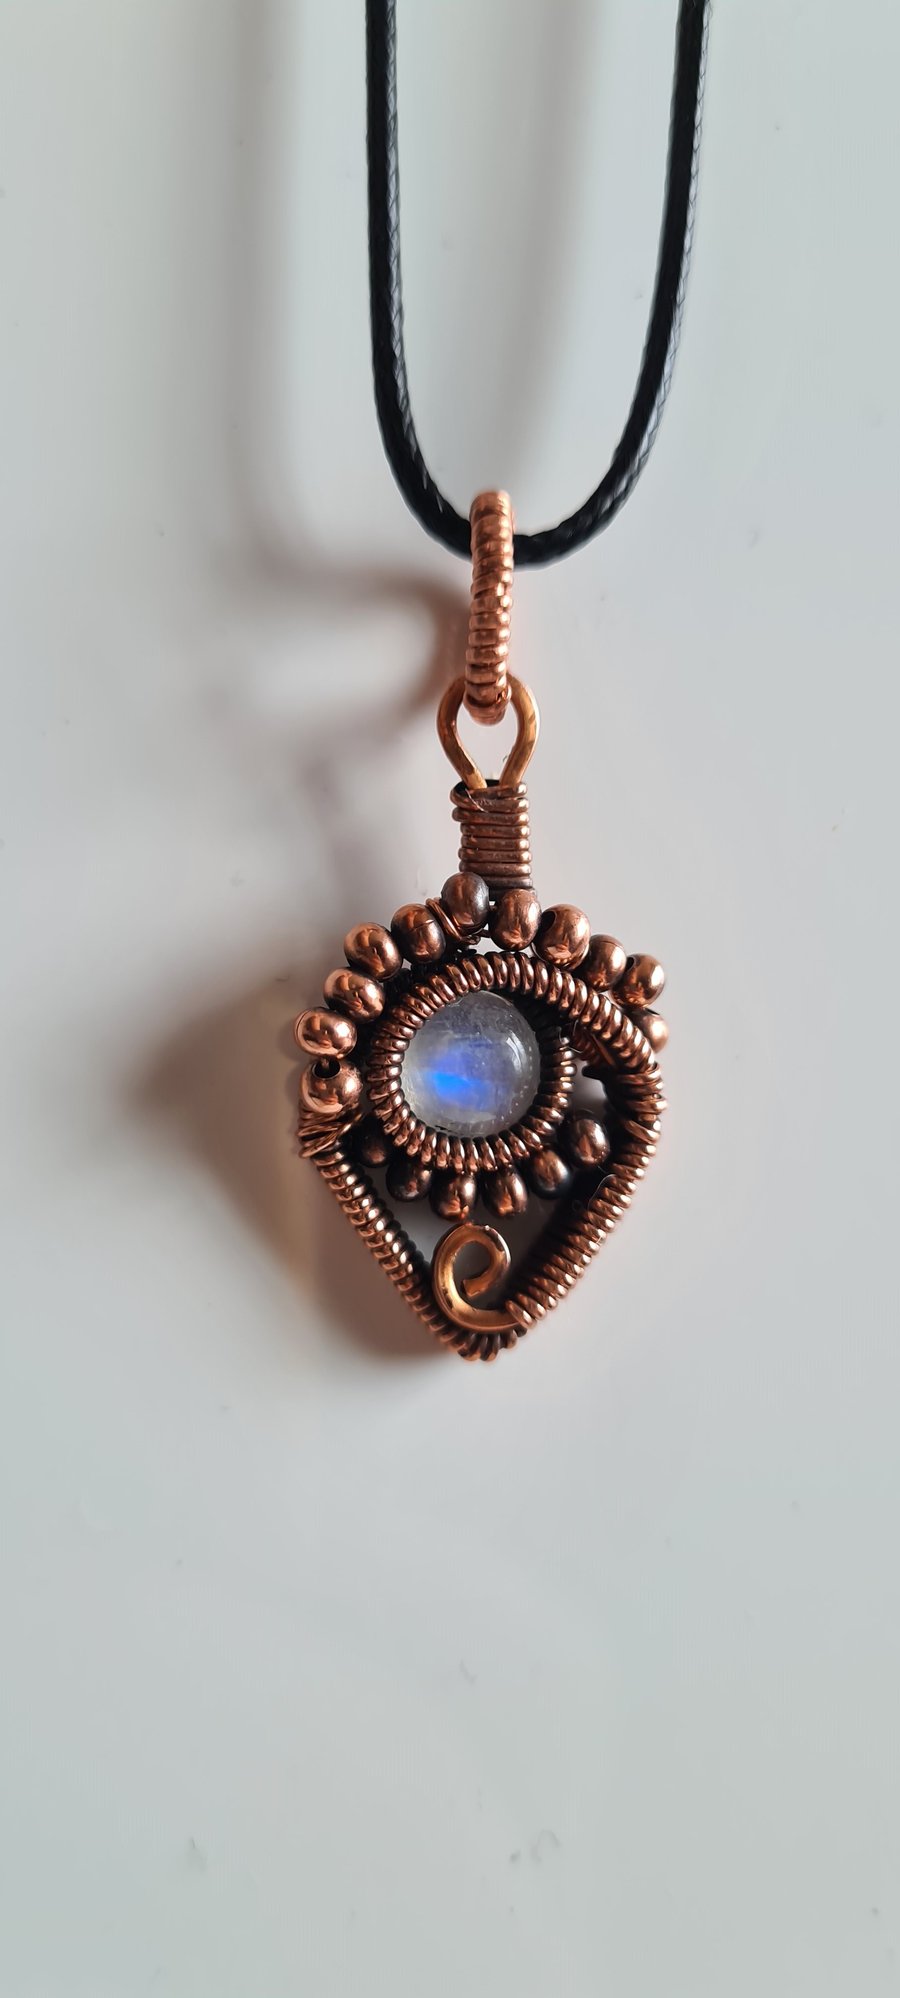 Handmade Natural Moonstone & Antiqued Copper Pendant Necklace Gift Boxed